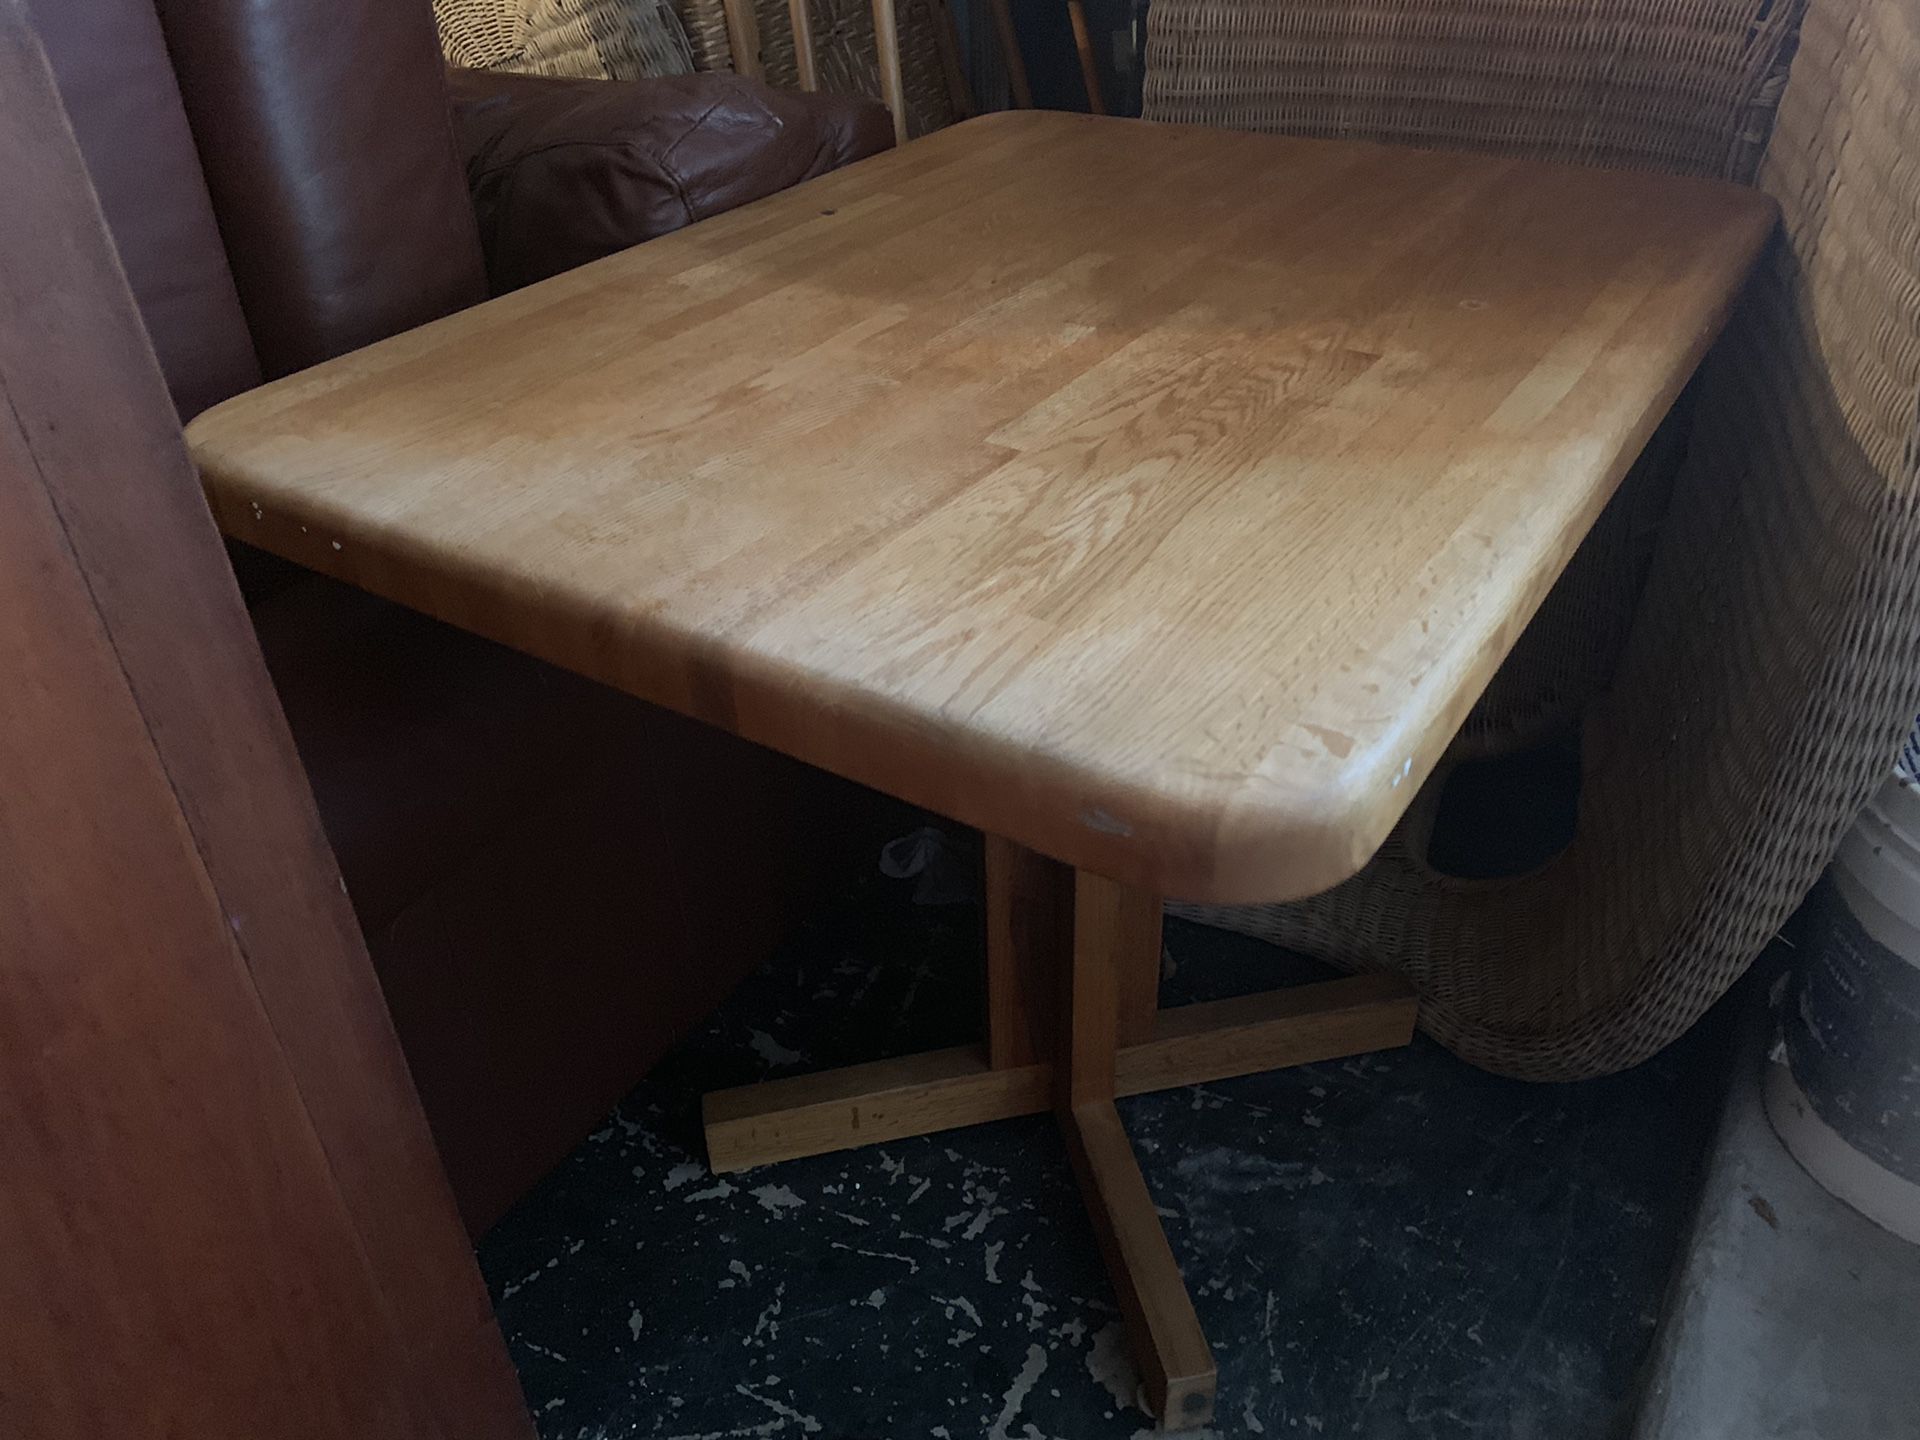 Butcher block table and 3 chairs